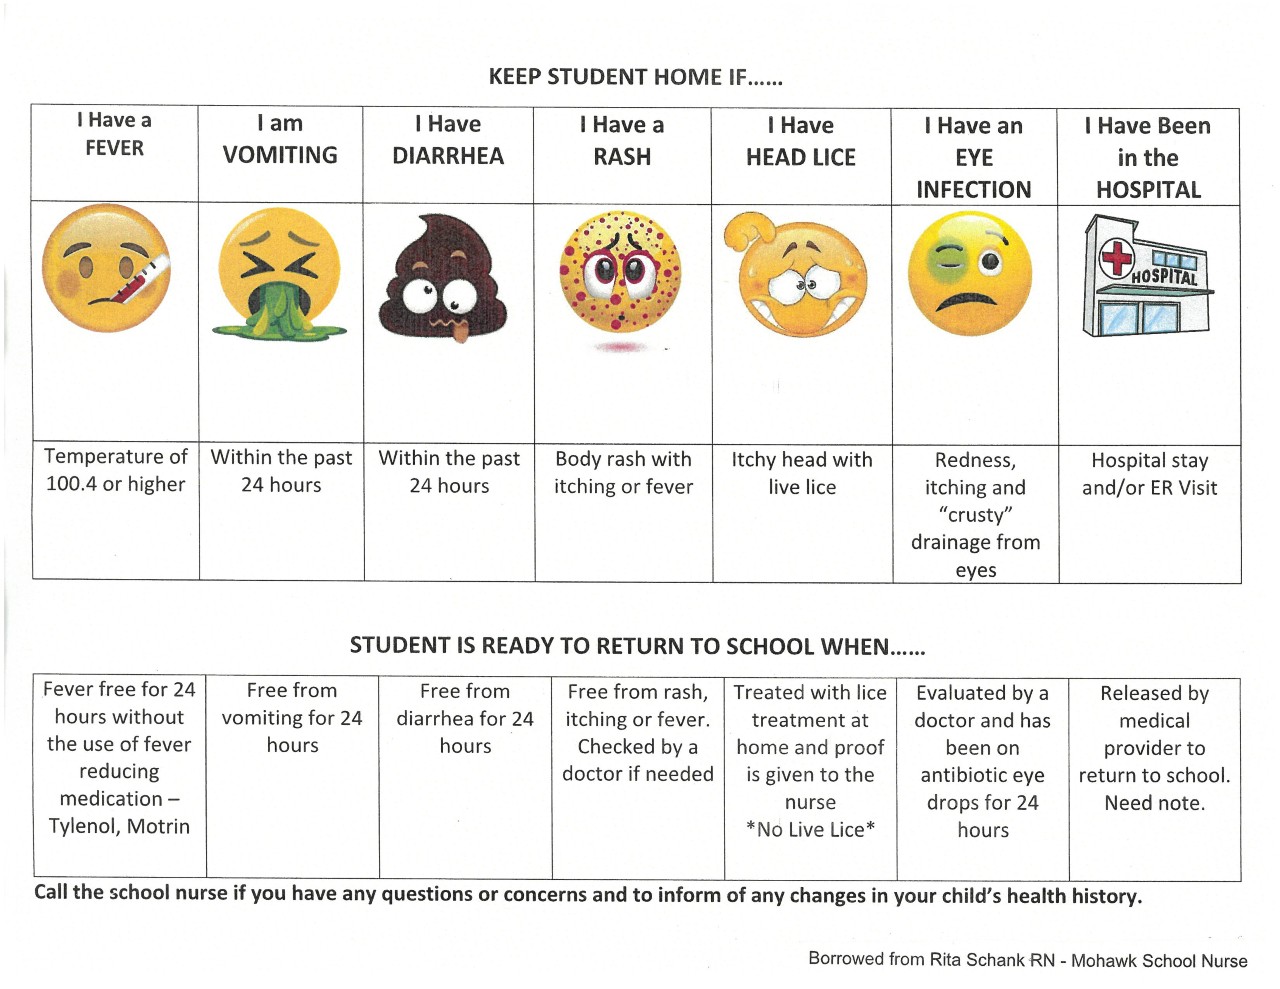 Keep Students Home Guidelines